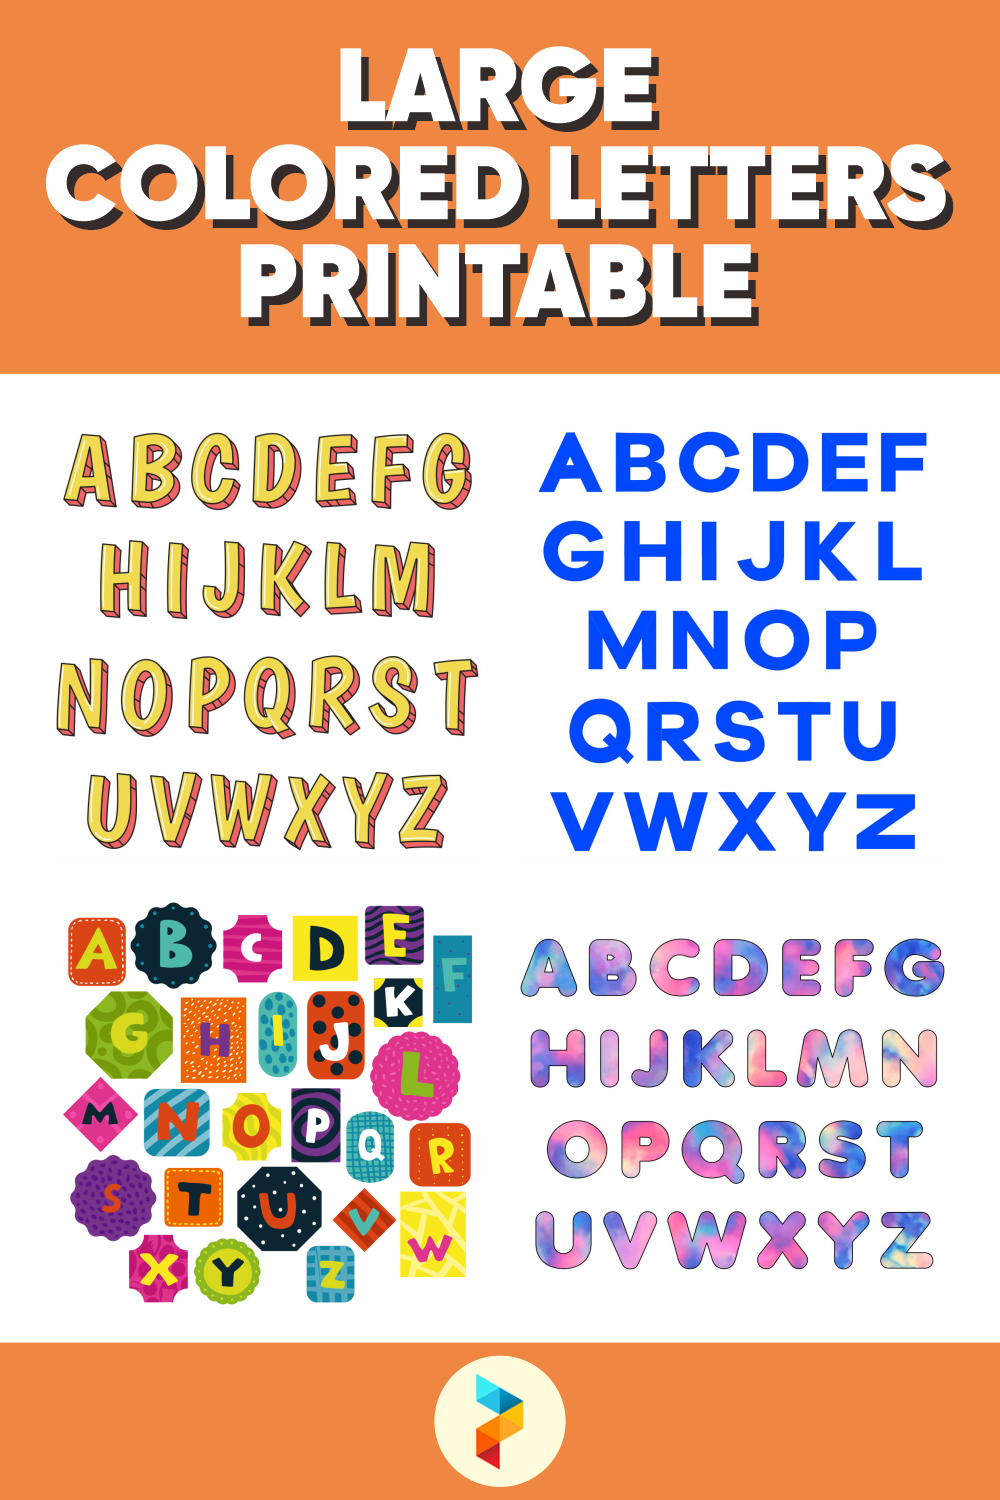 6-best-large-colored-letters-printable-printableecom-6-best-images-of